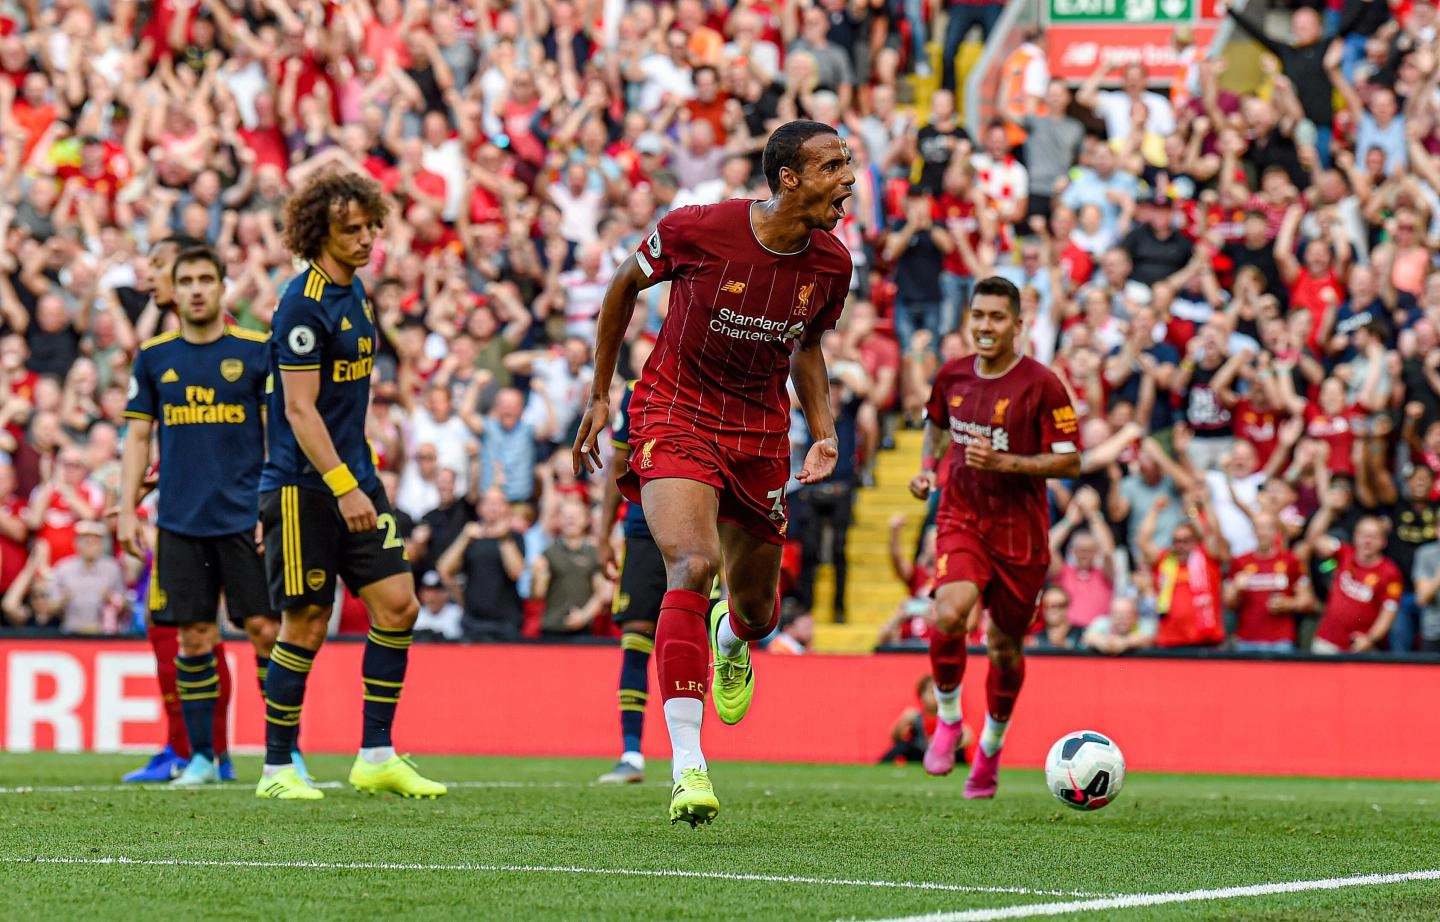 August 2019: Celebrating a goal against Arsenal